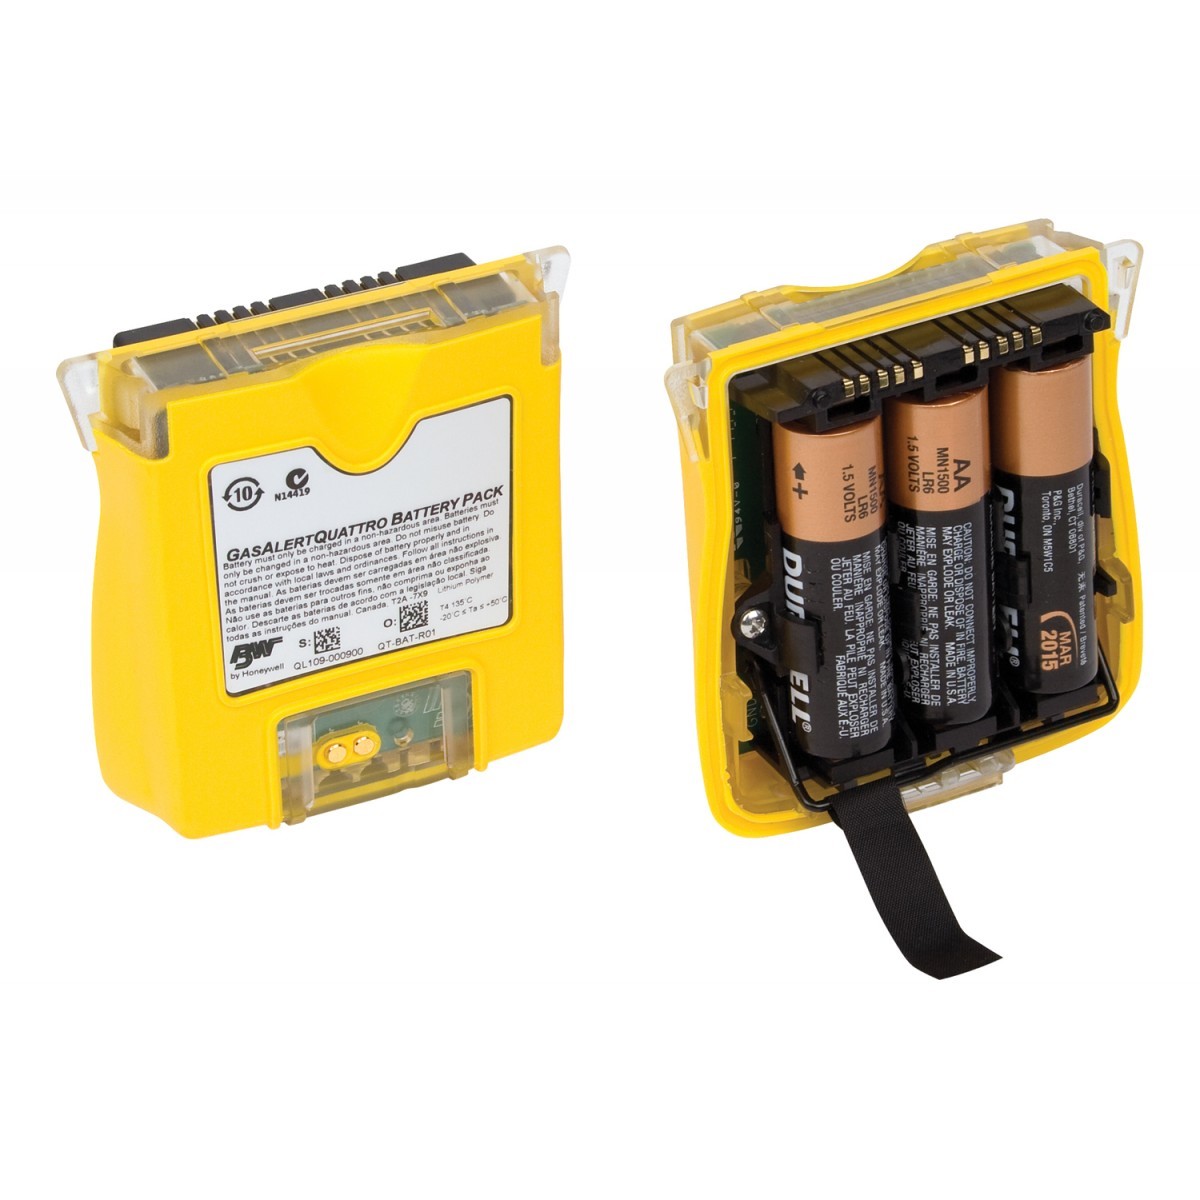 Honeywell Yellow Rechargeable Battery Pack For GasAlertQuattro Multi-Gas Detector